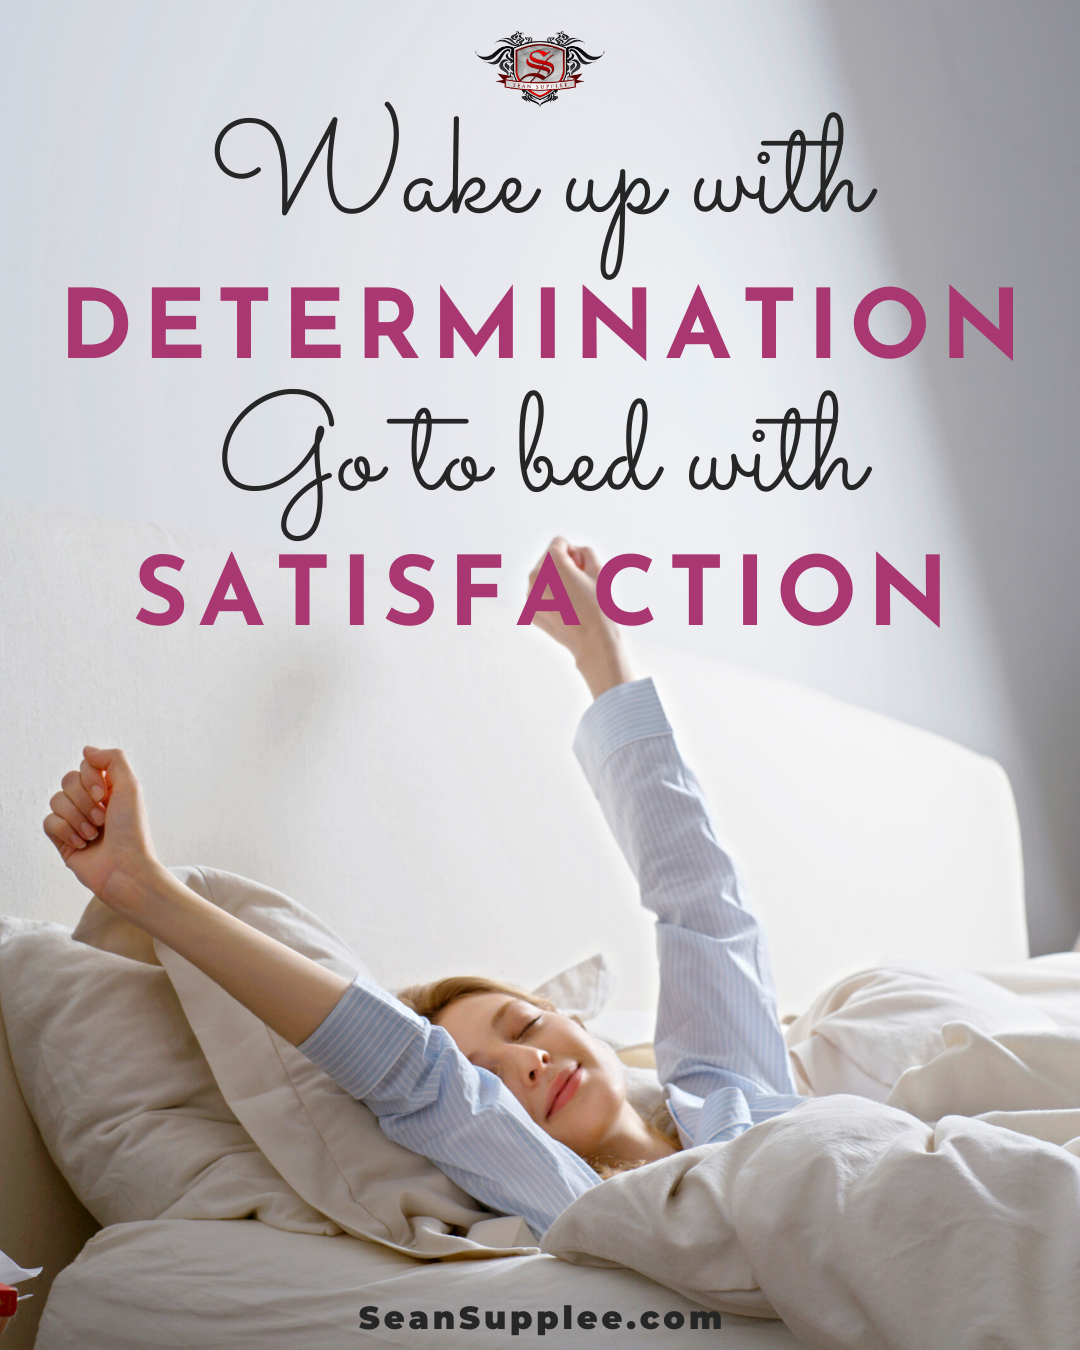 10_Wake up with determination.png